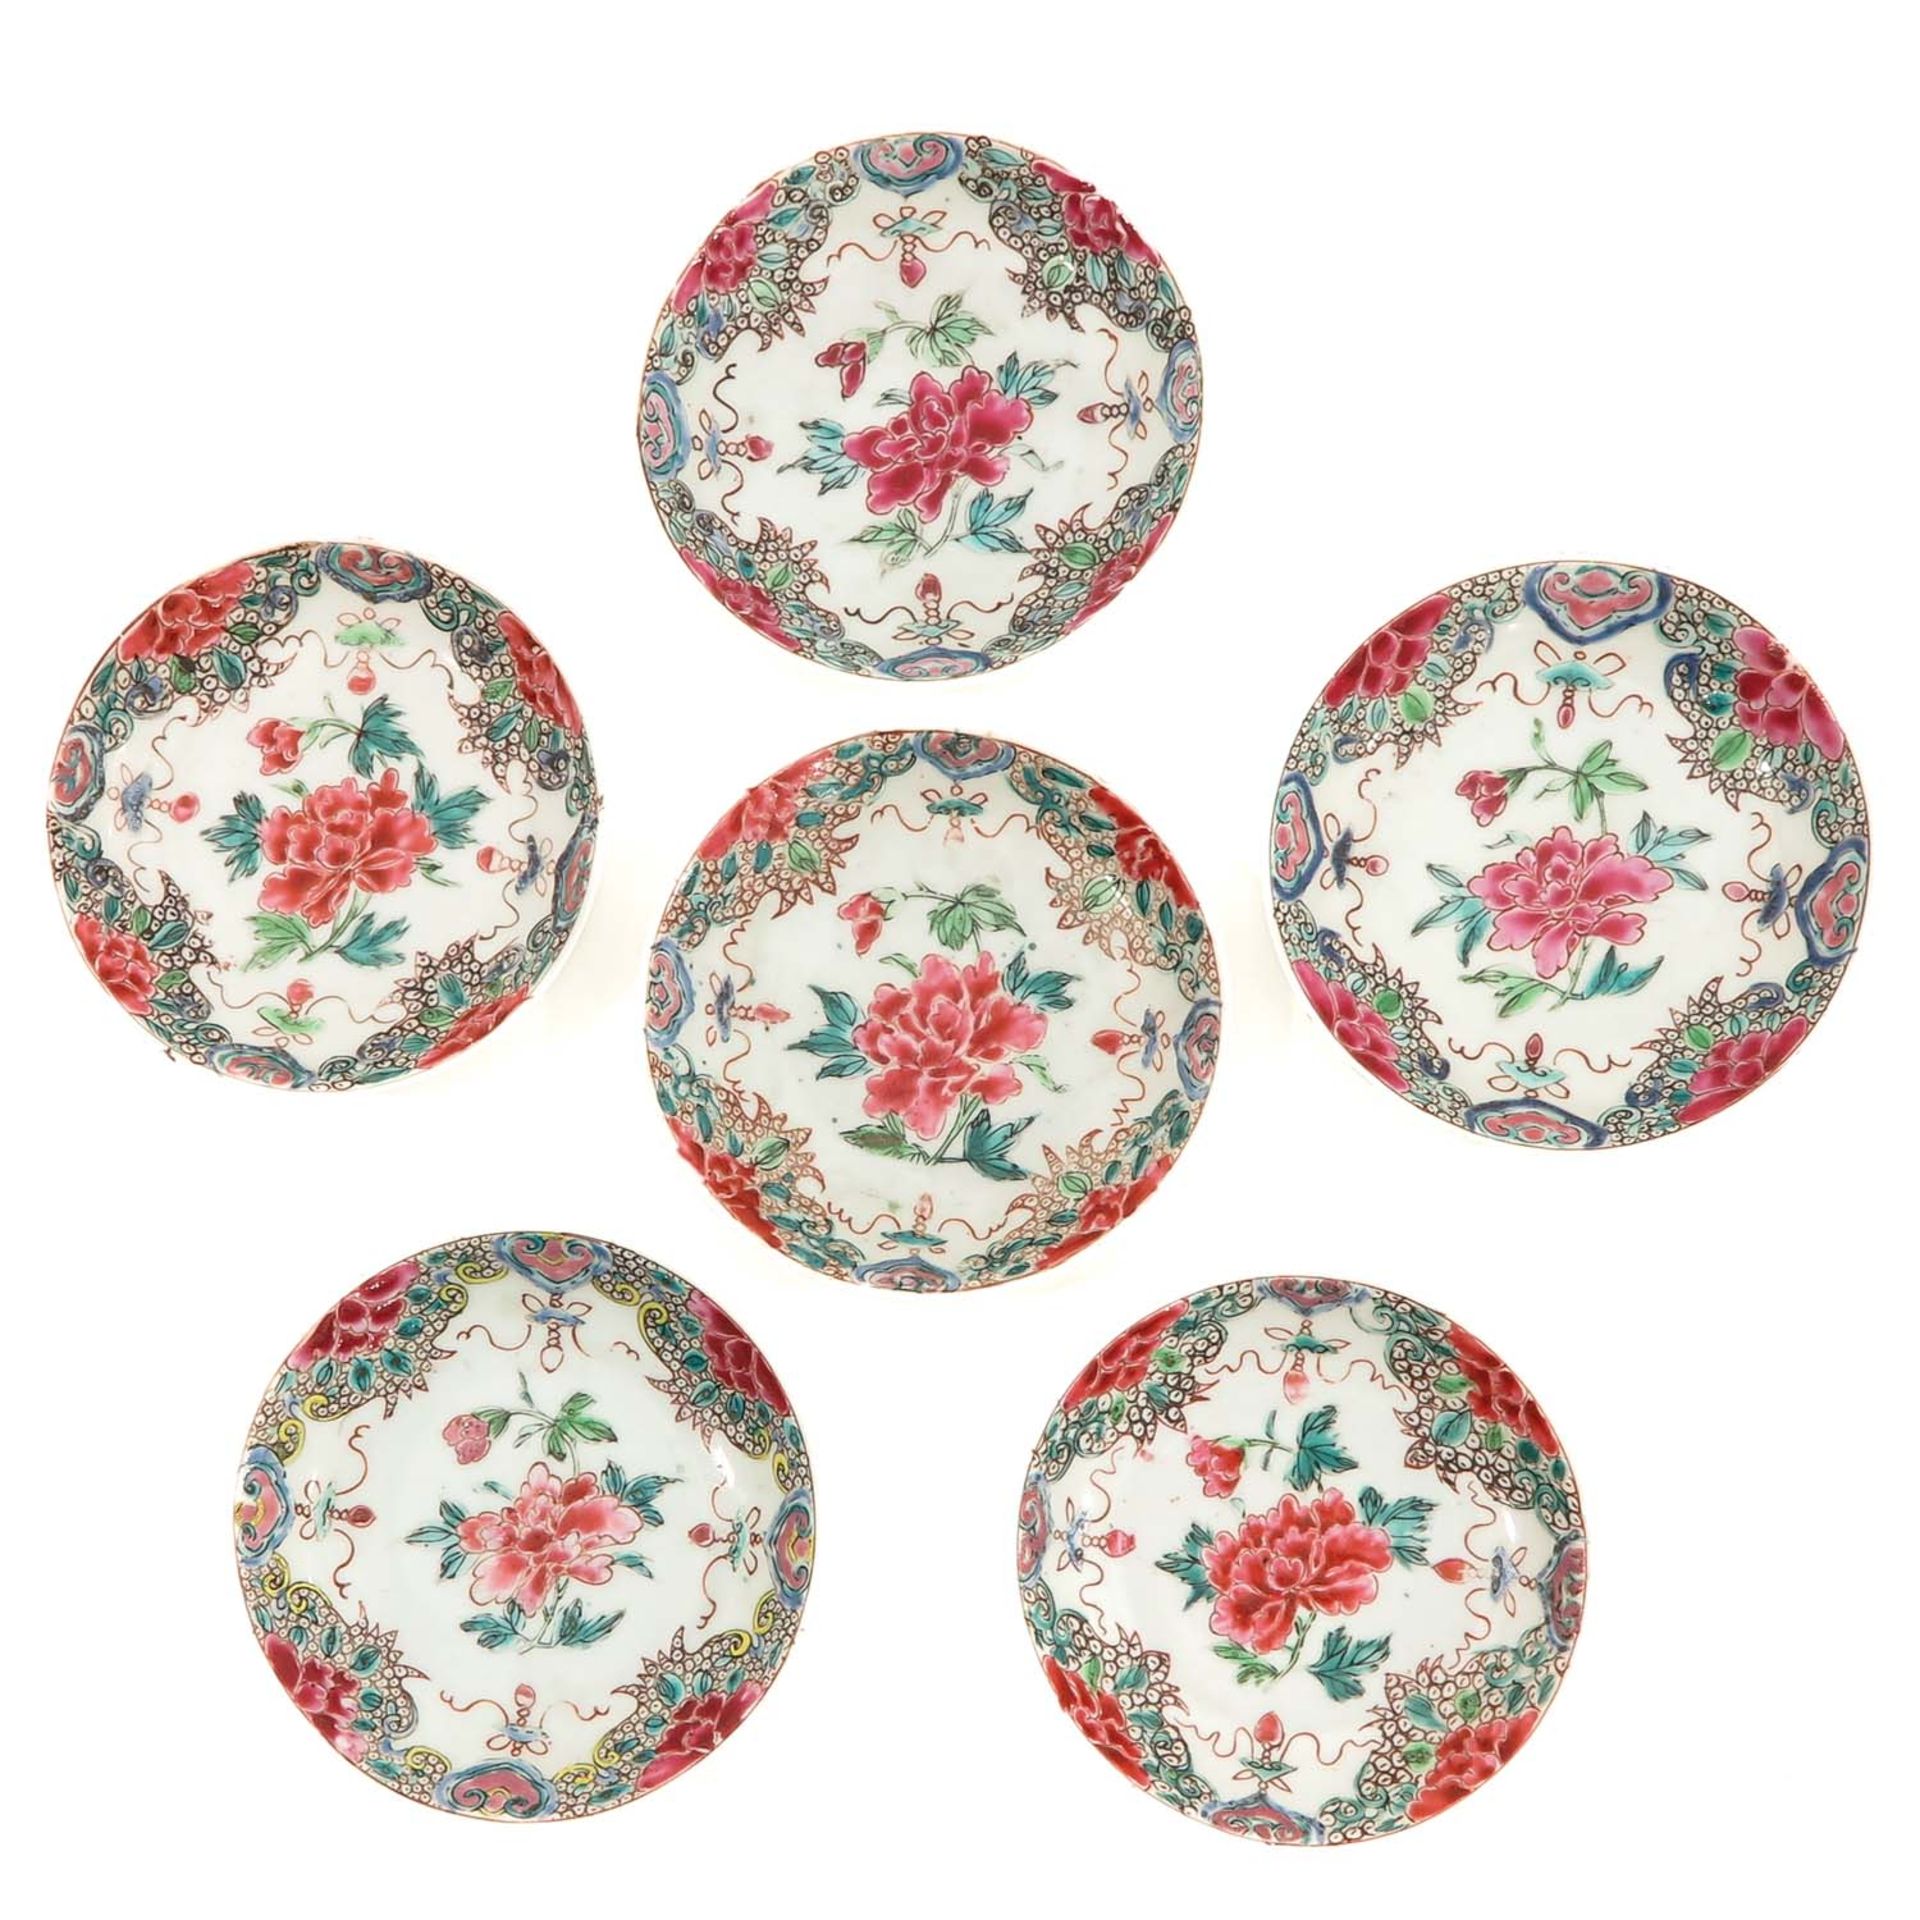 A Series of 6 Famille Rose Cups and Saucers - Image 7 of 10